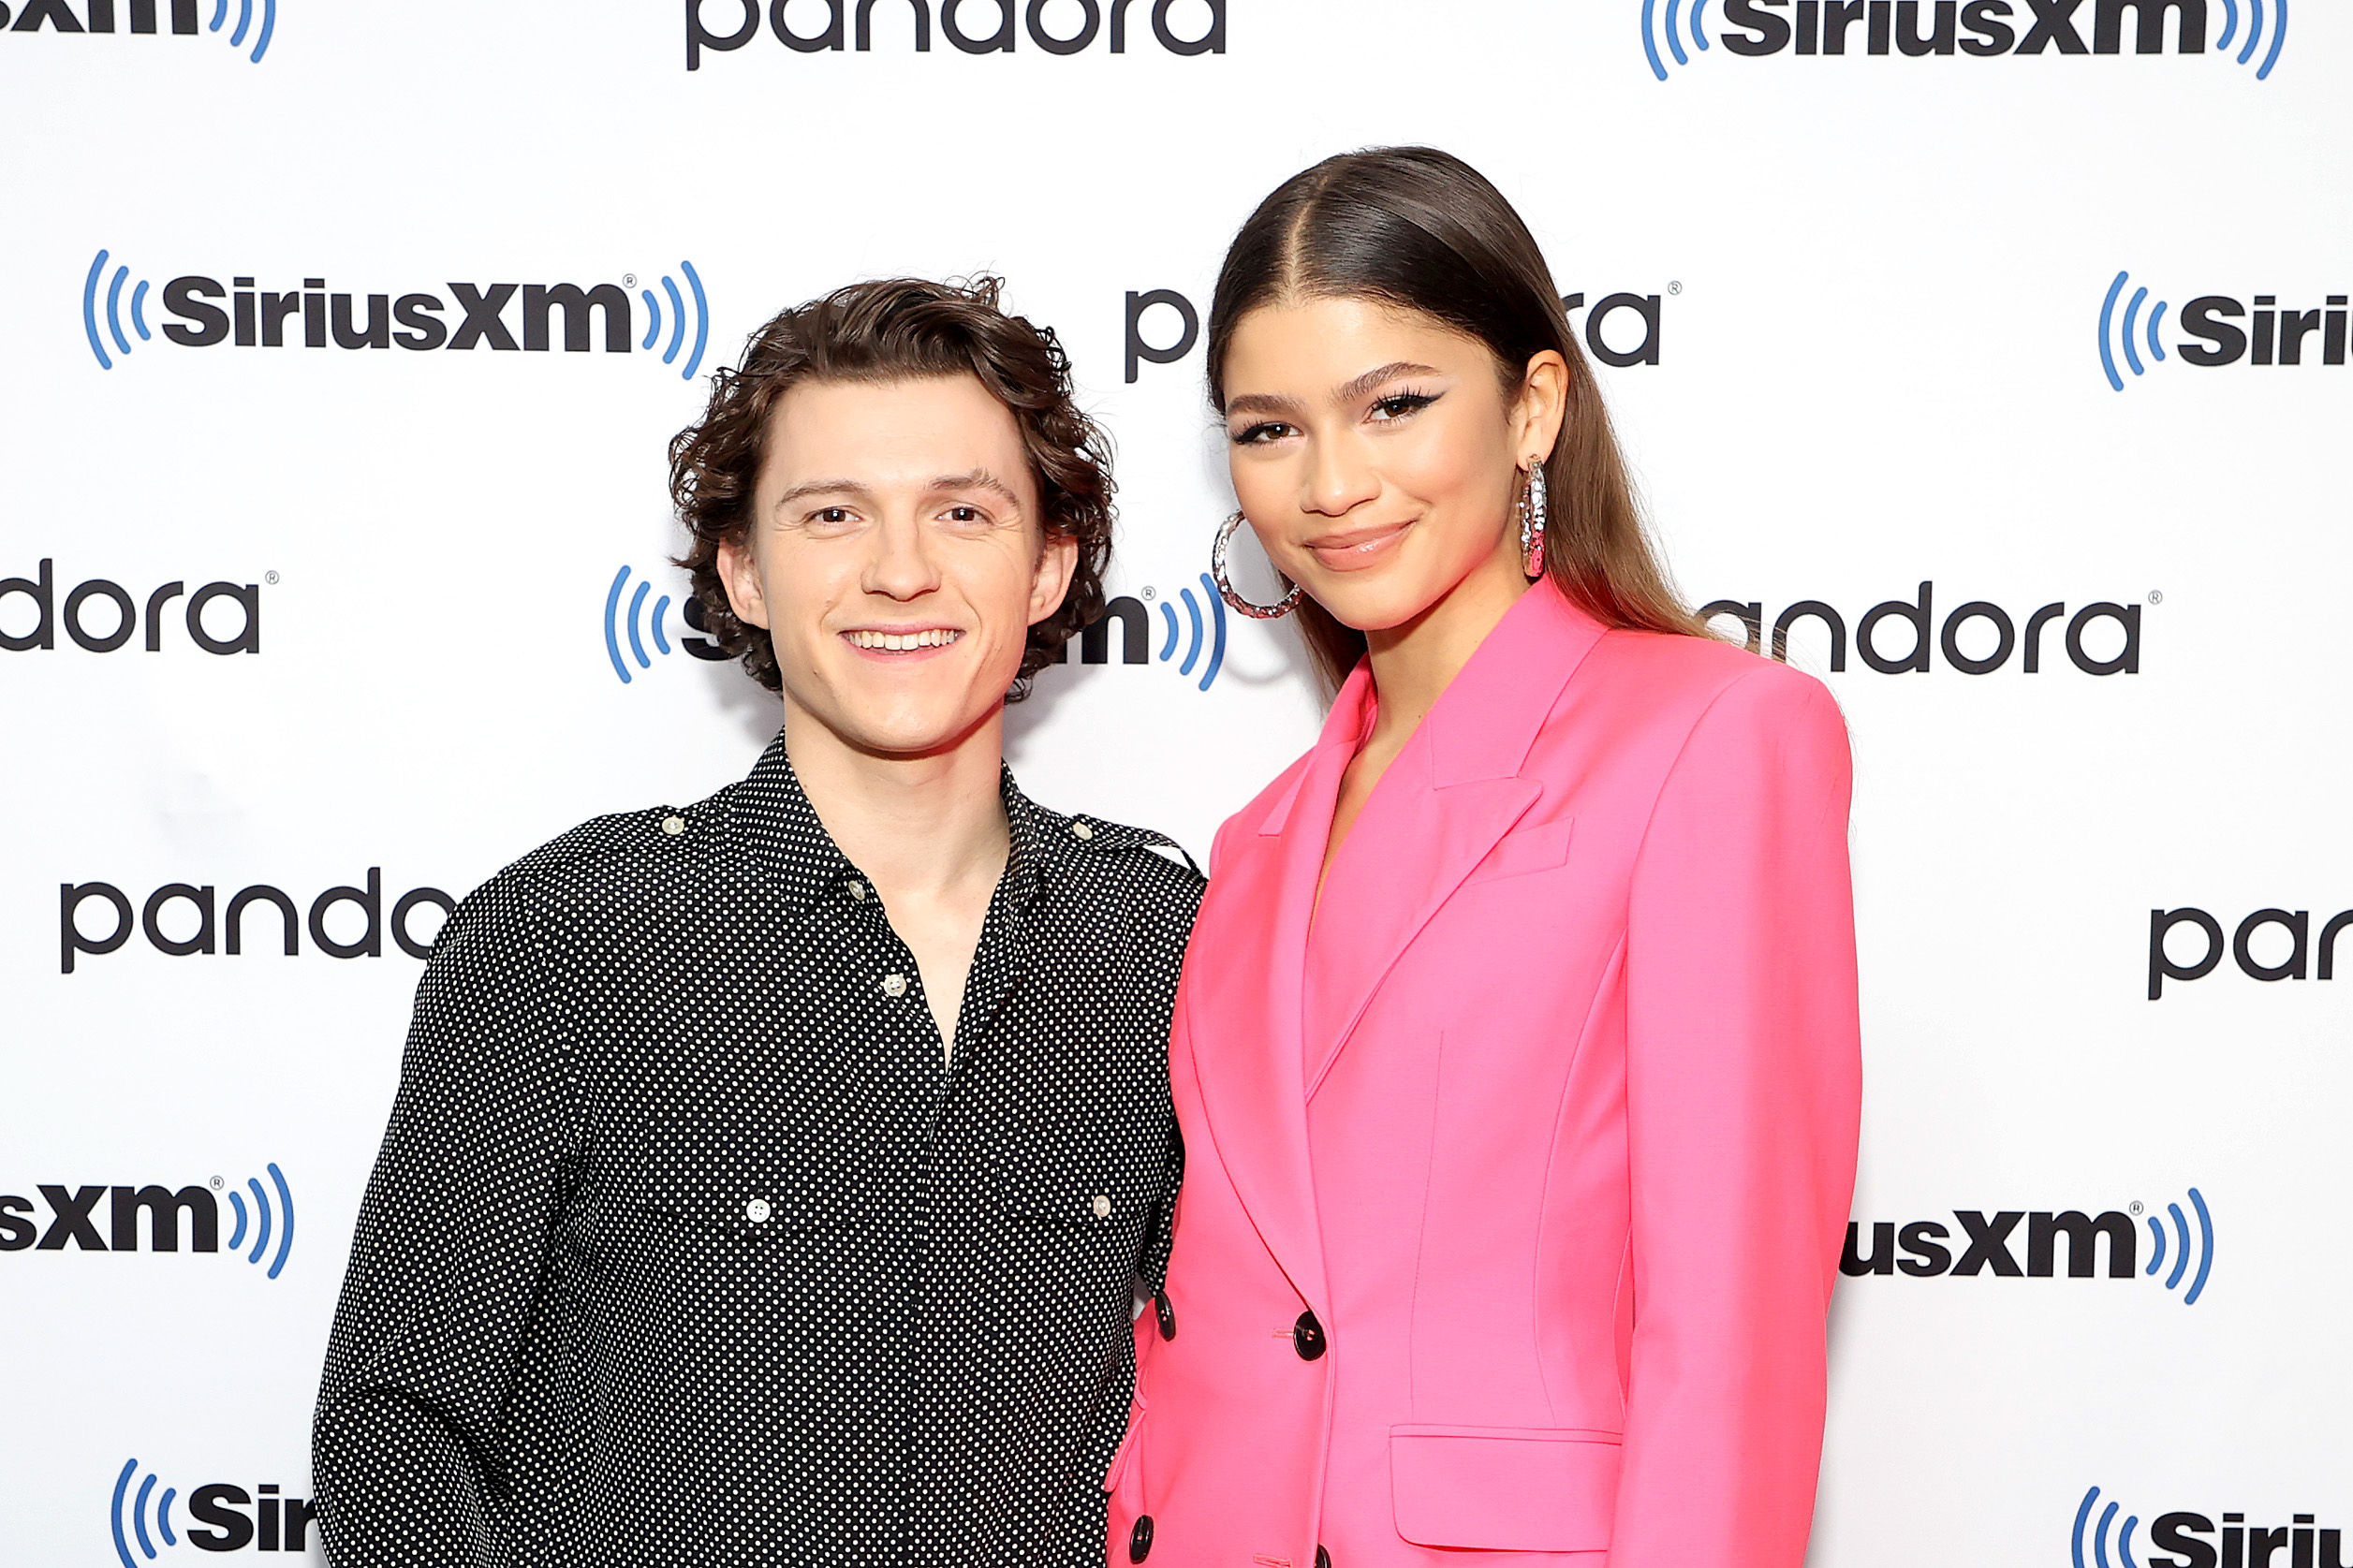 'Spider-Man: No Way Home' stars Tom Holland and Zendaya pose for a picture toether. Holland wears a black button-up long-sleeved shirt with white polka dots. Zendaya wears a bright pink suit.